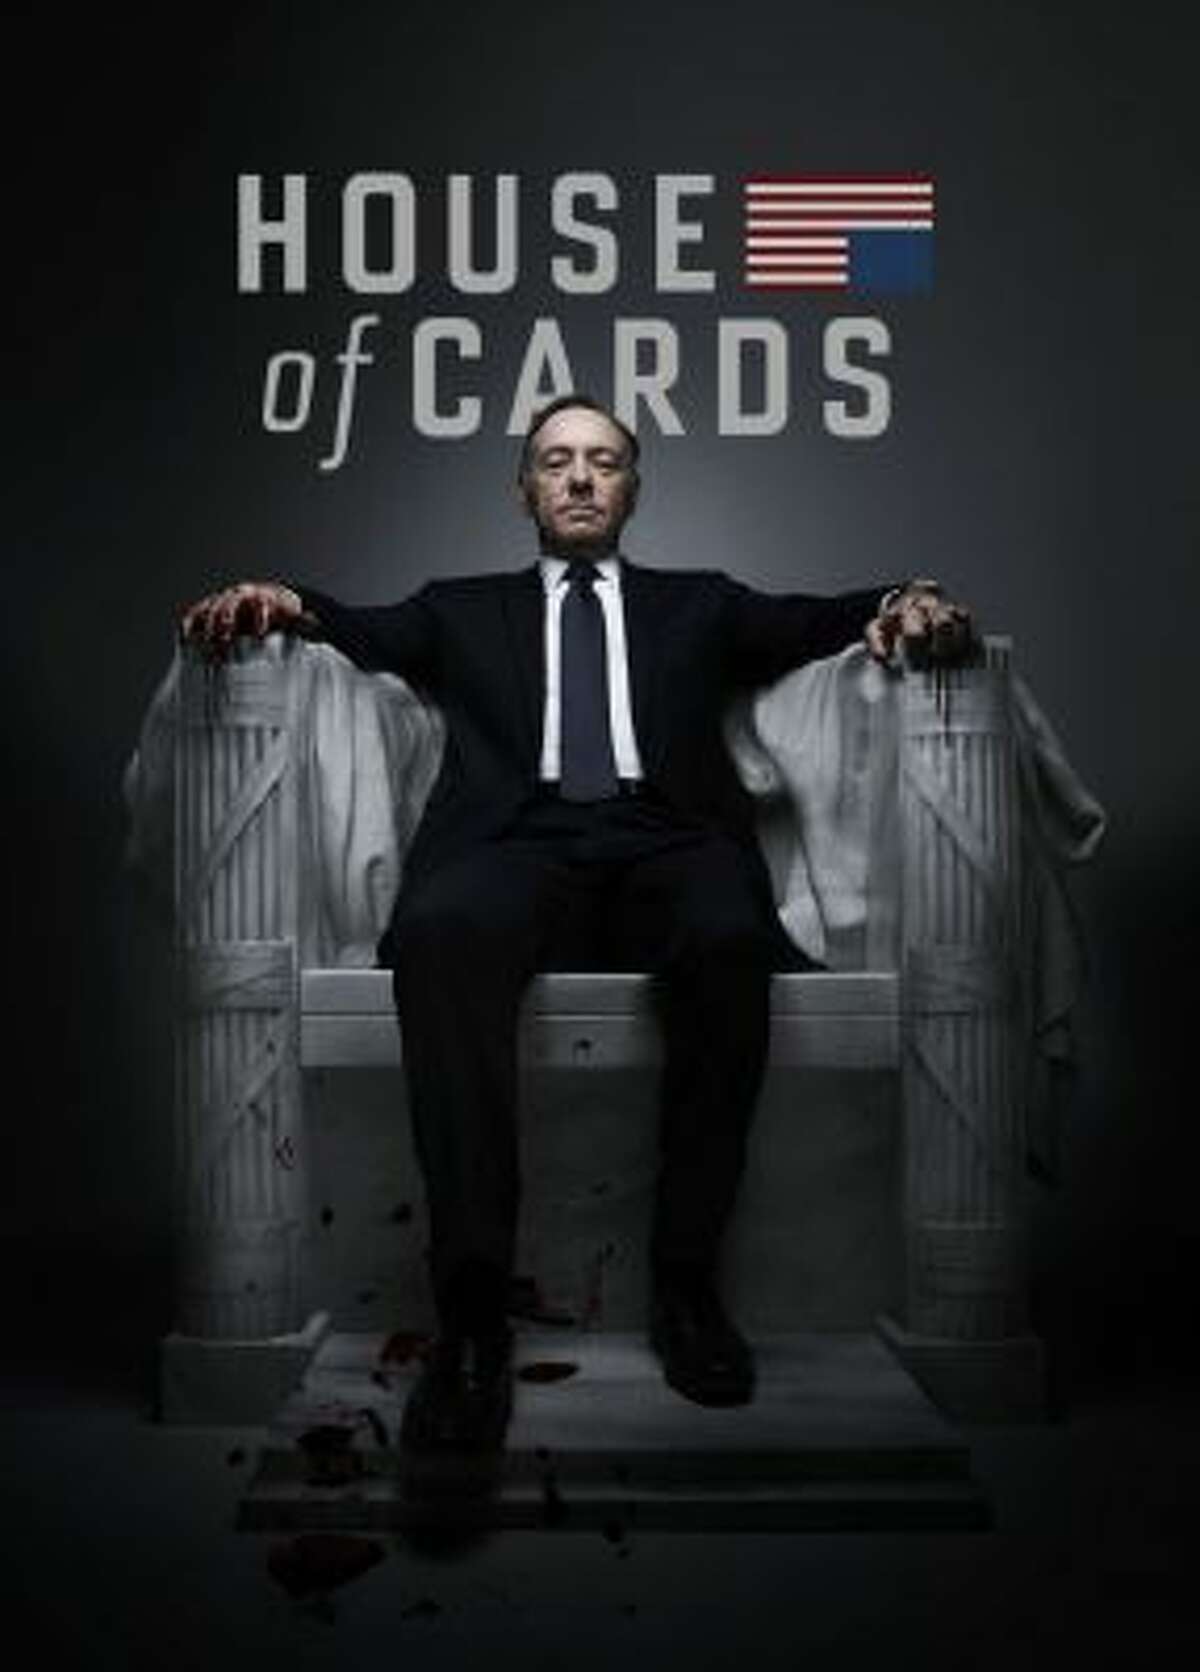 Following its first season, "House of Cards" was a nominee for four Golden Globe Awards.